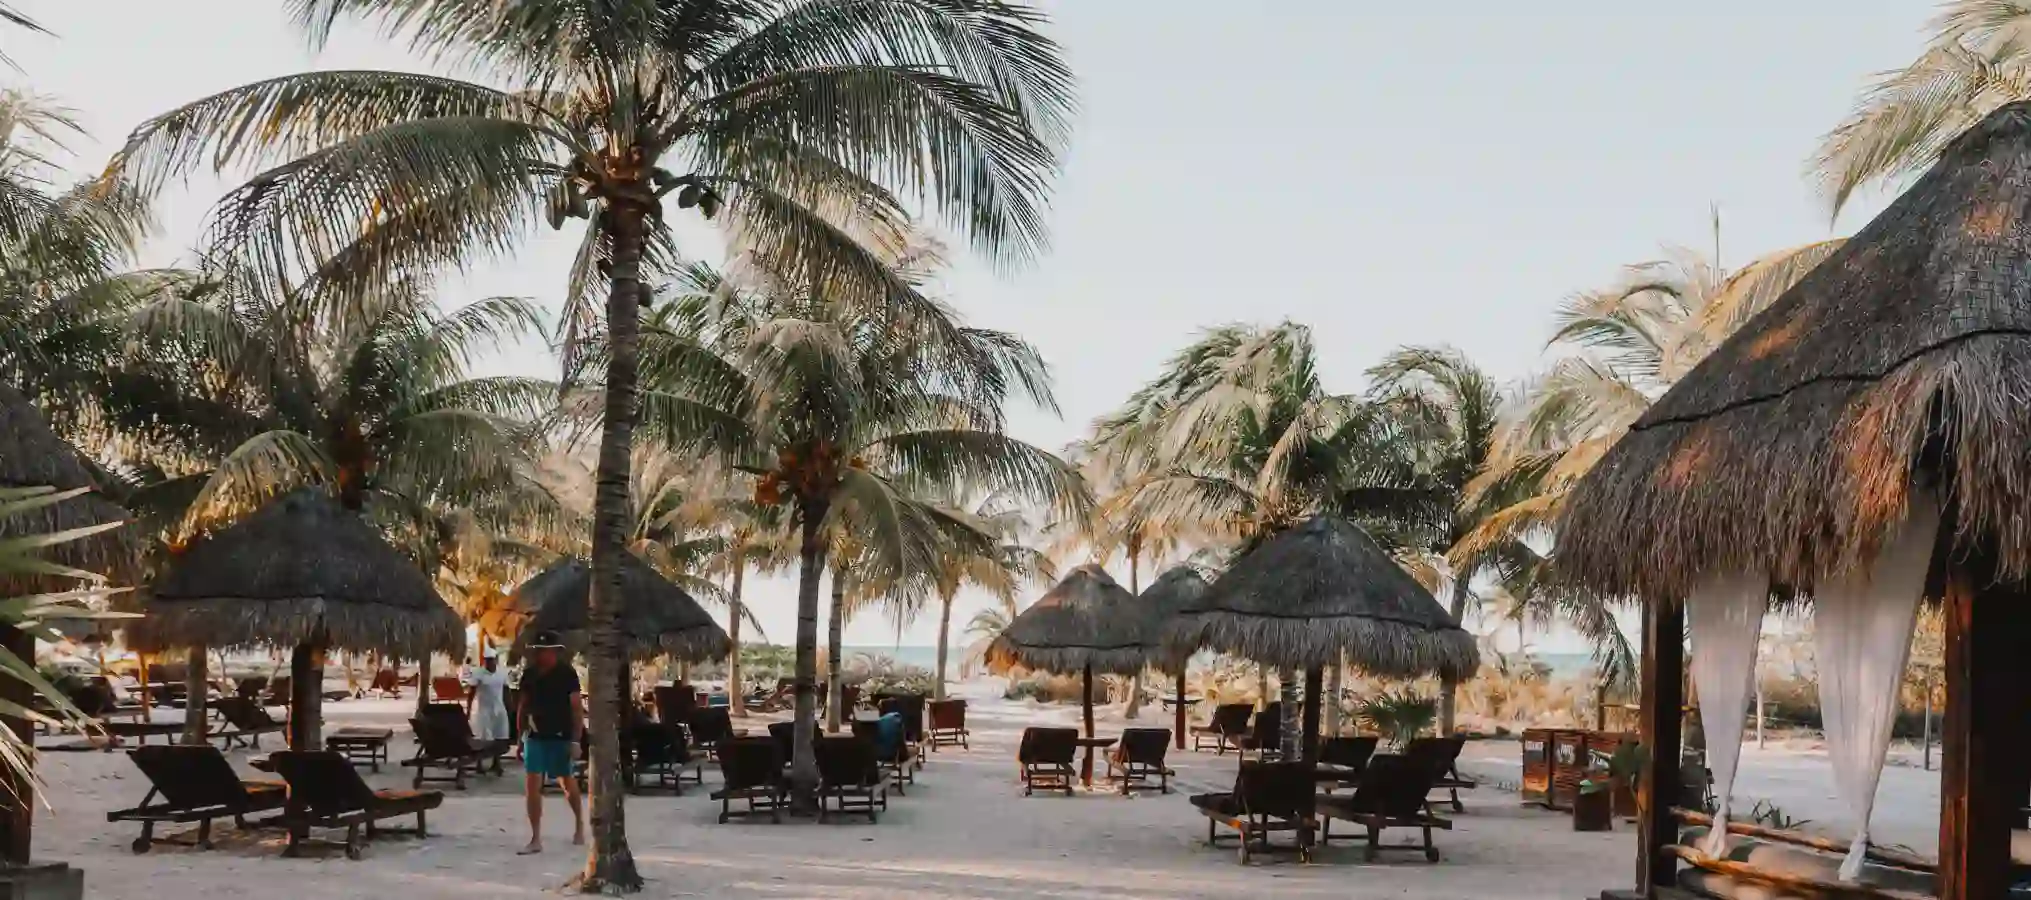 Beach with palm trees and chairs